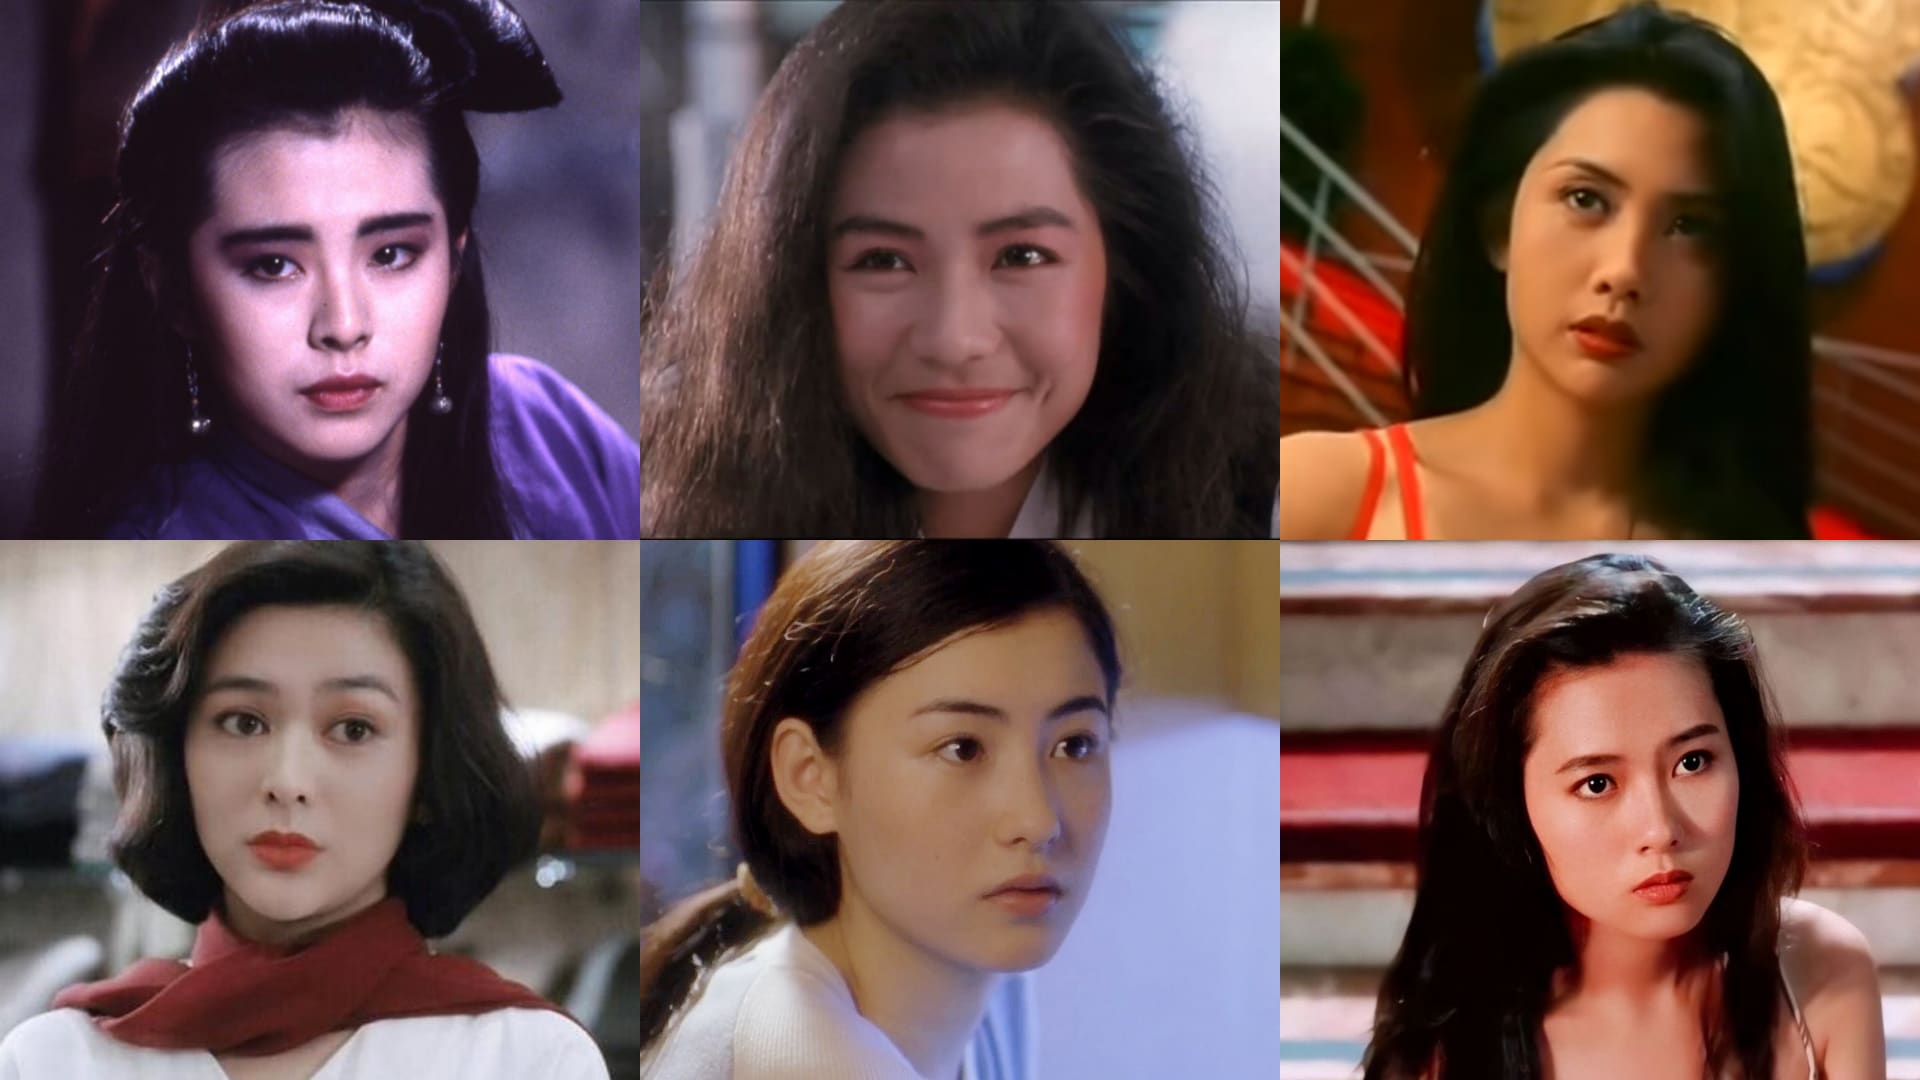 Here Are The Top 15 “Hongkong Screen Goddesses” Of The ‘80s & ‘90s According To Netizens